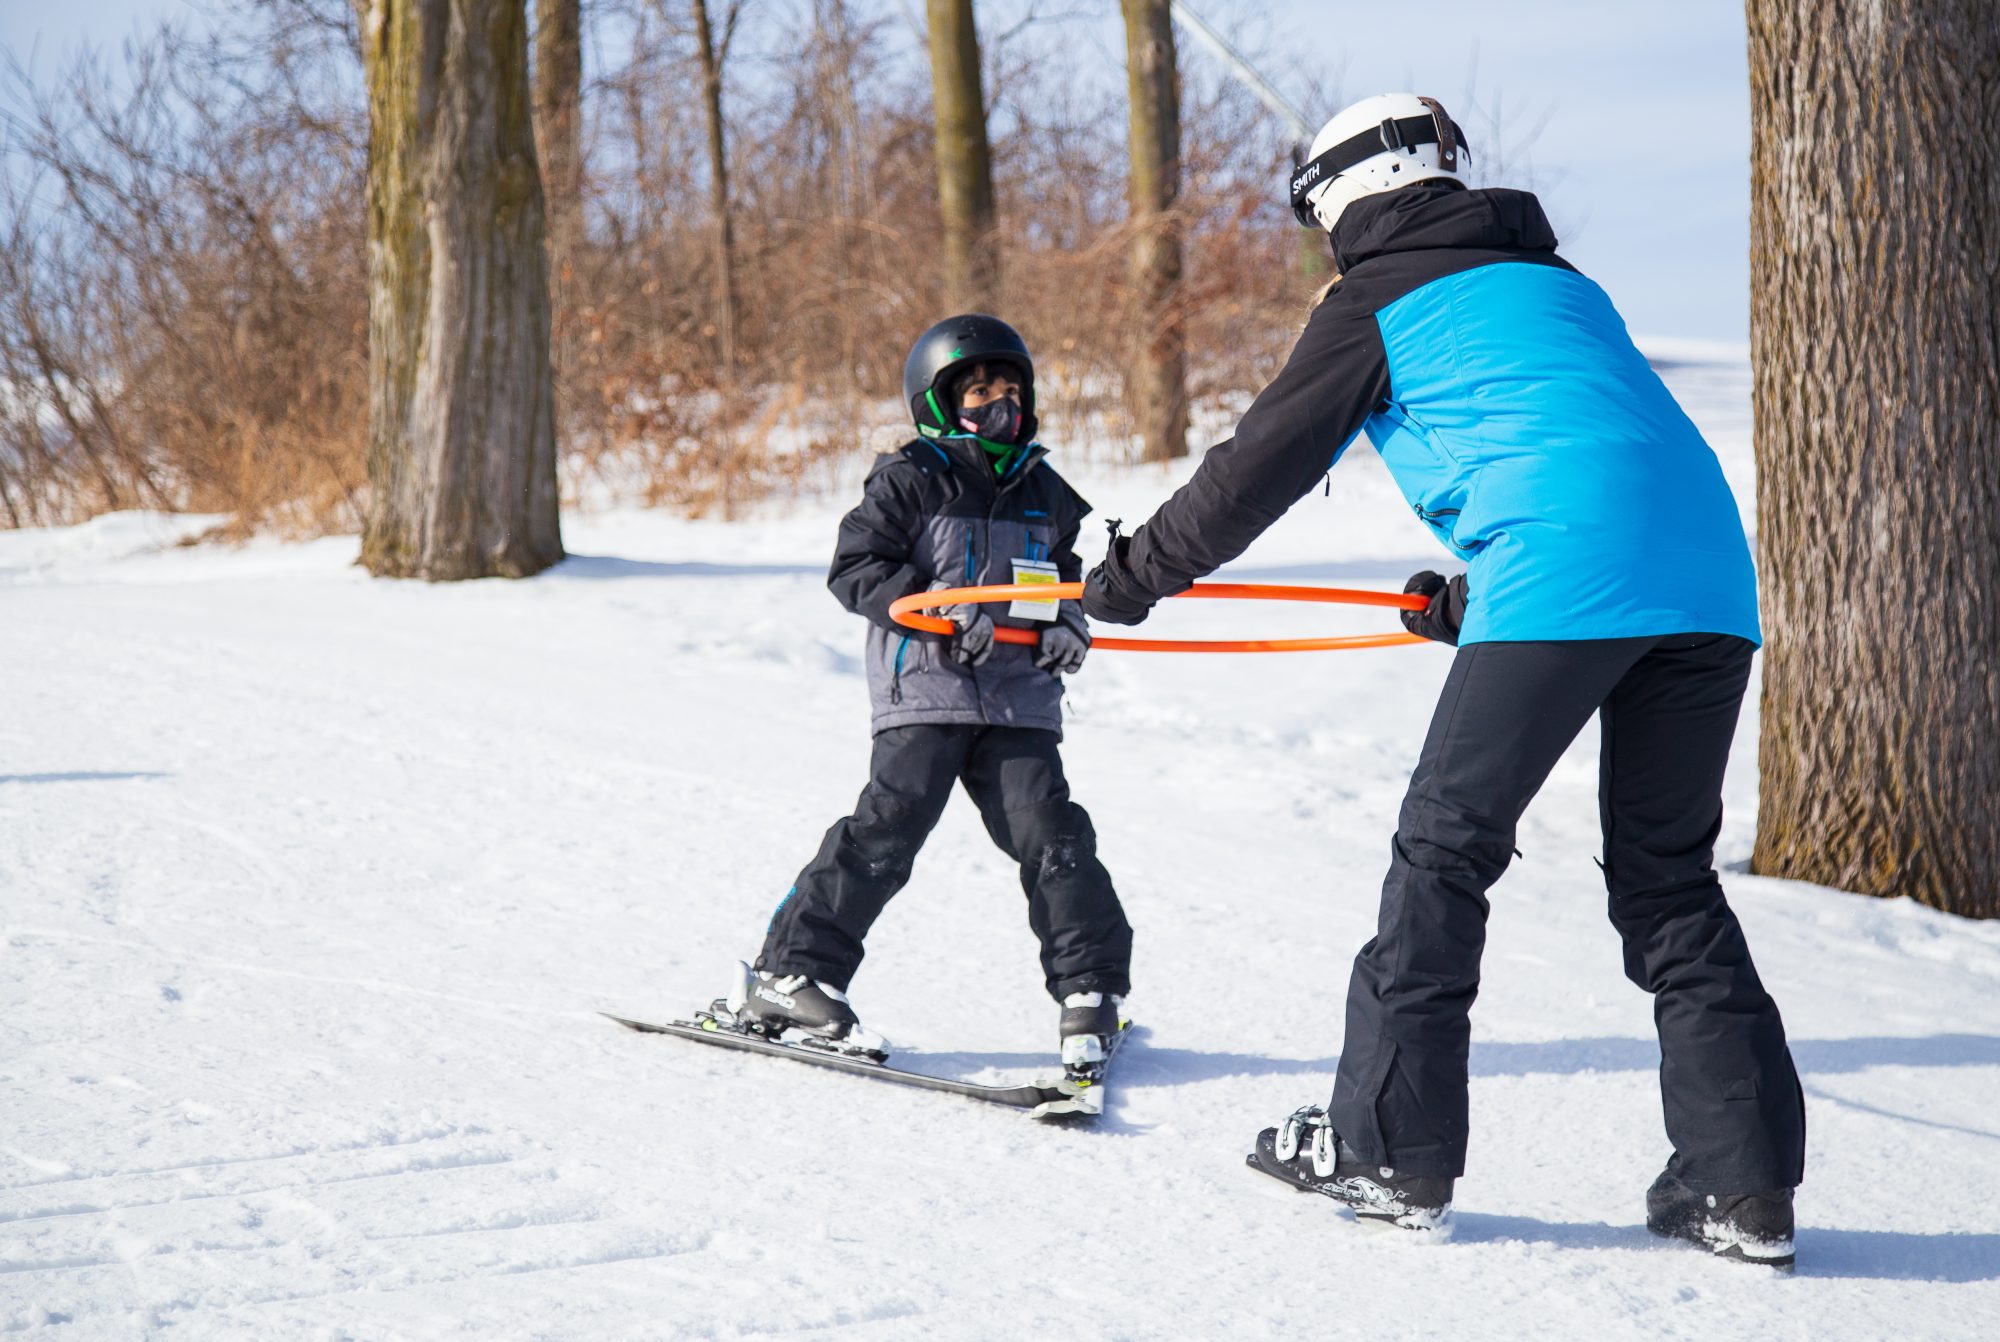 ski instructor pulling a young child forward on a pair of skis